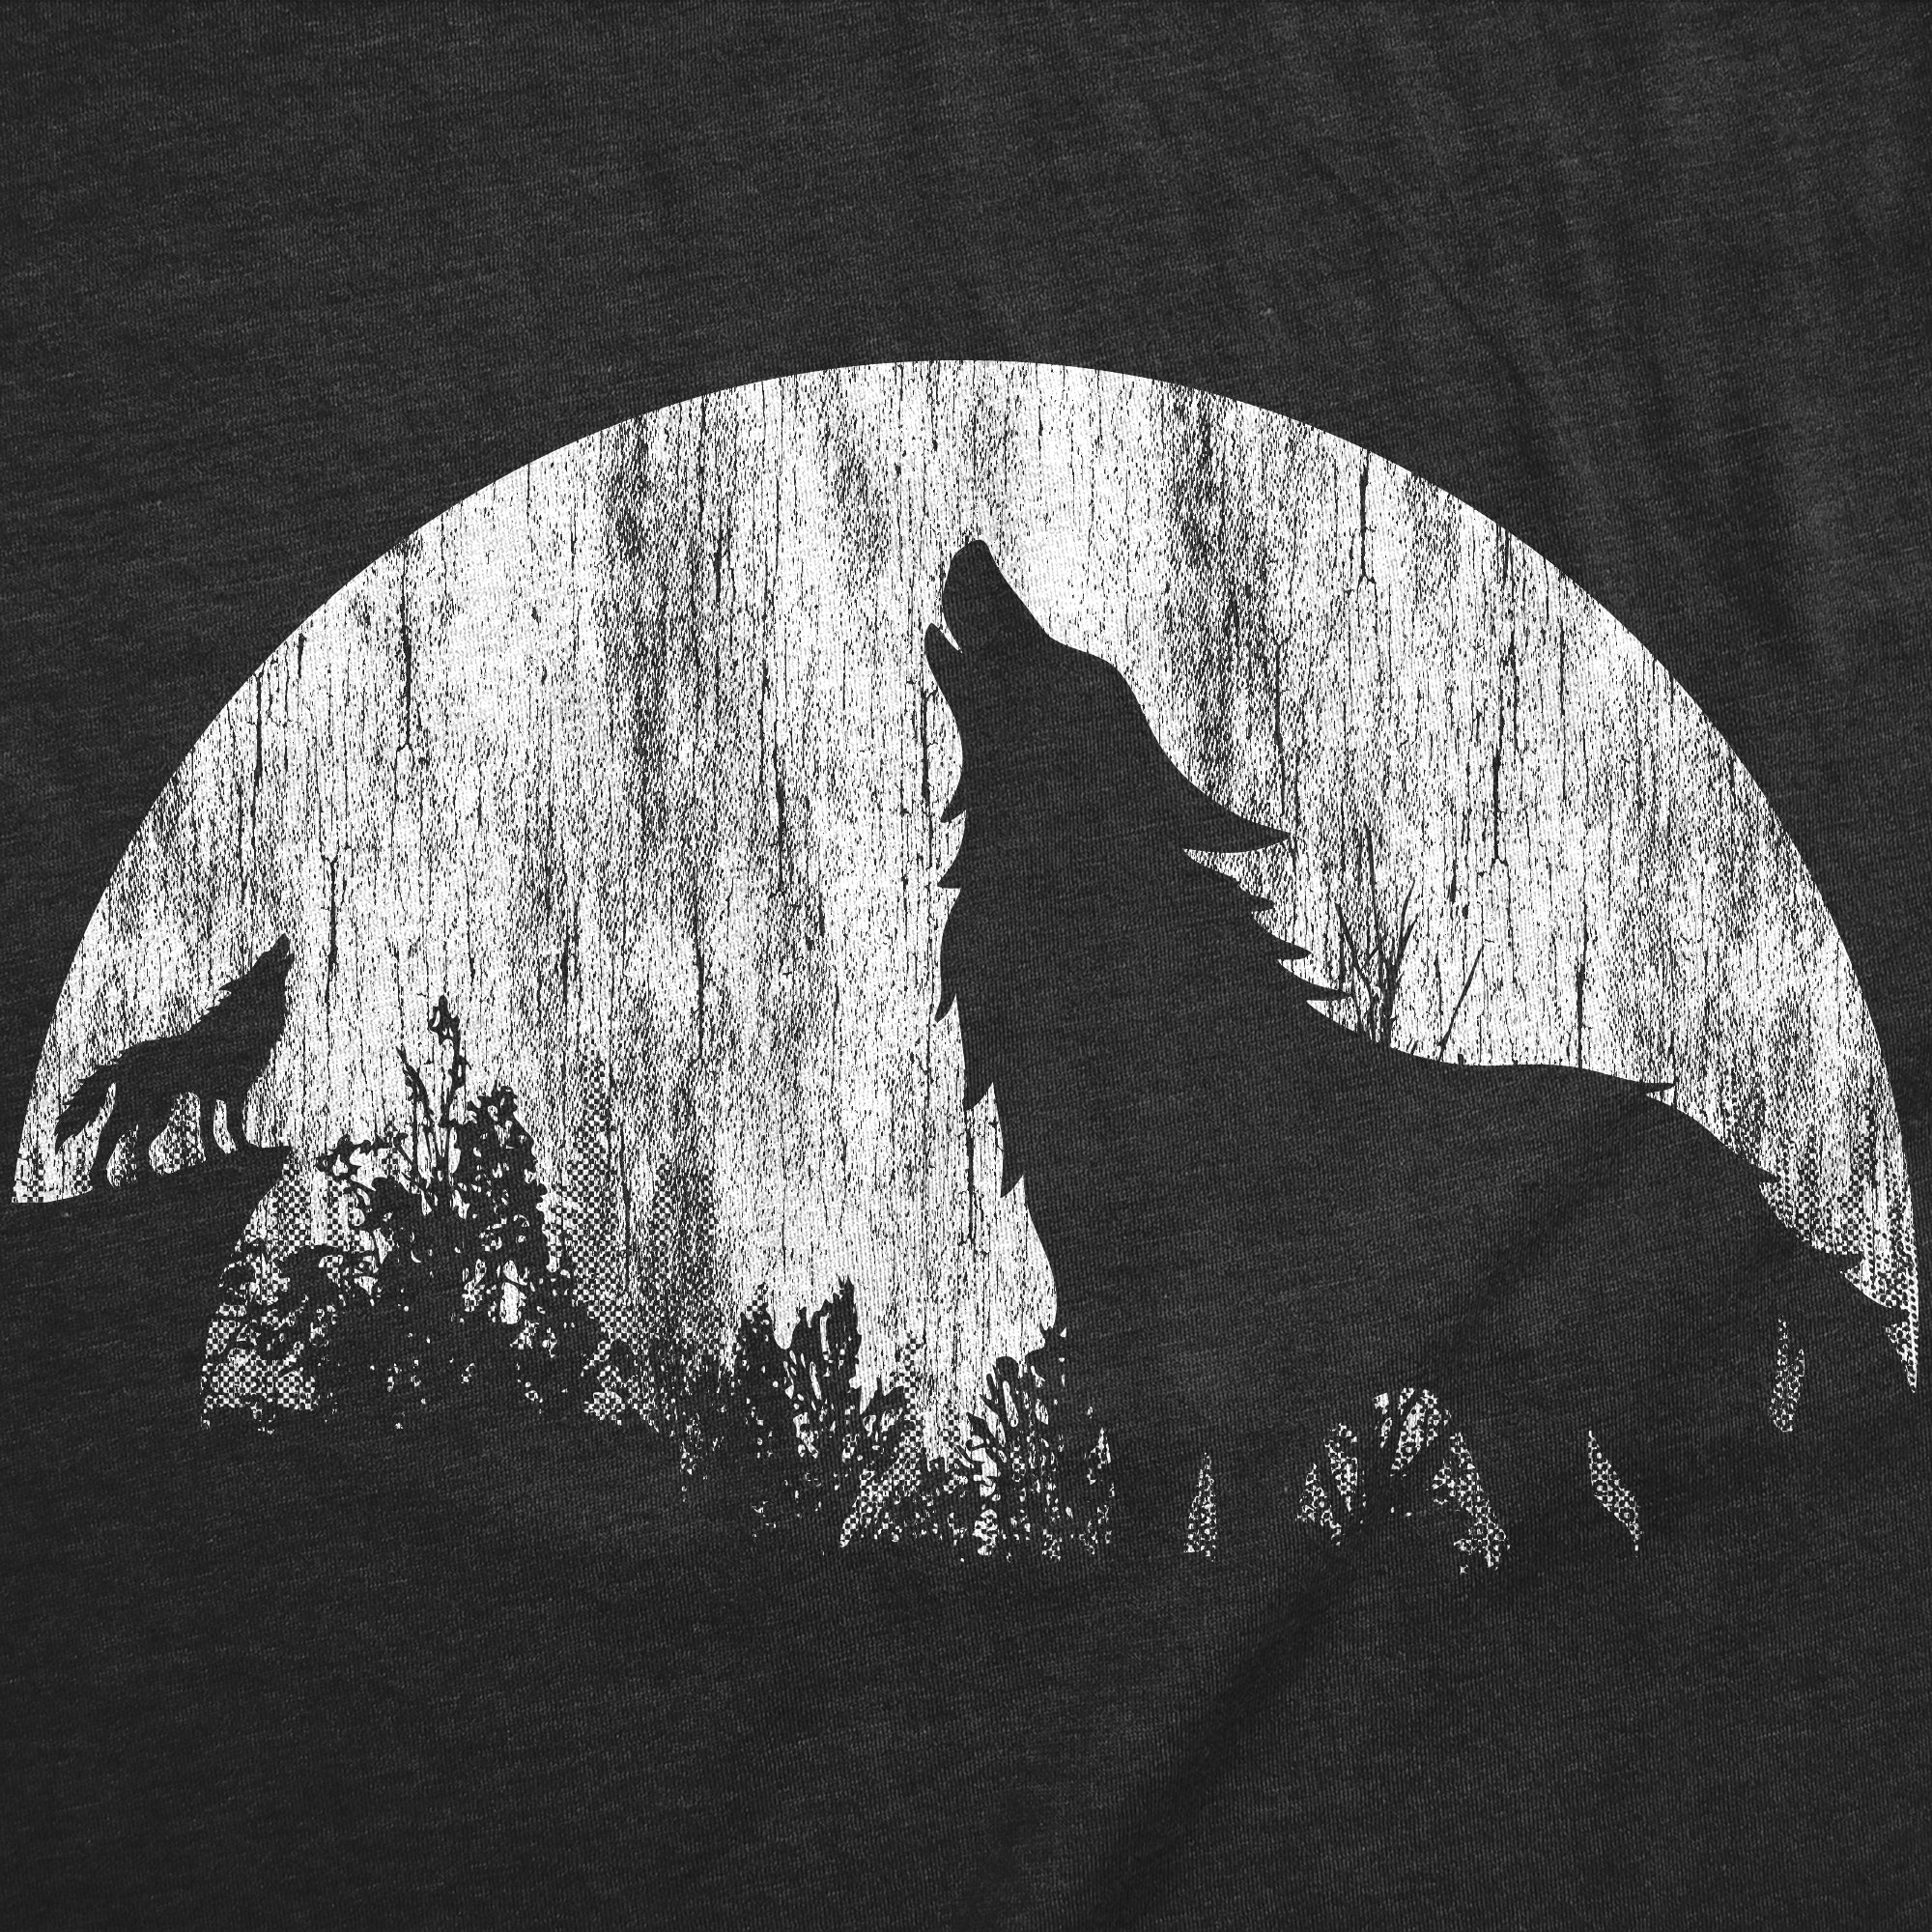 Funny Heather Black - Moon Wolves Moon Wolves Mens T Shirt Nerdy Animal Tee